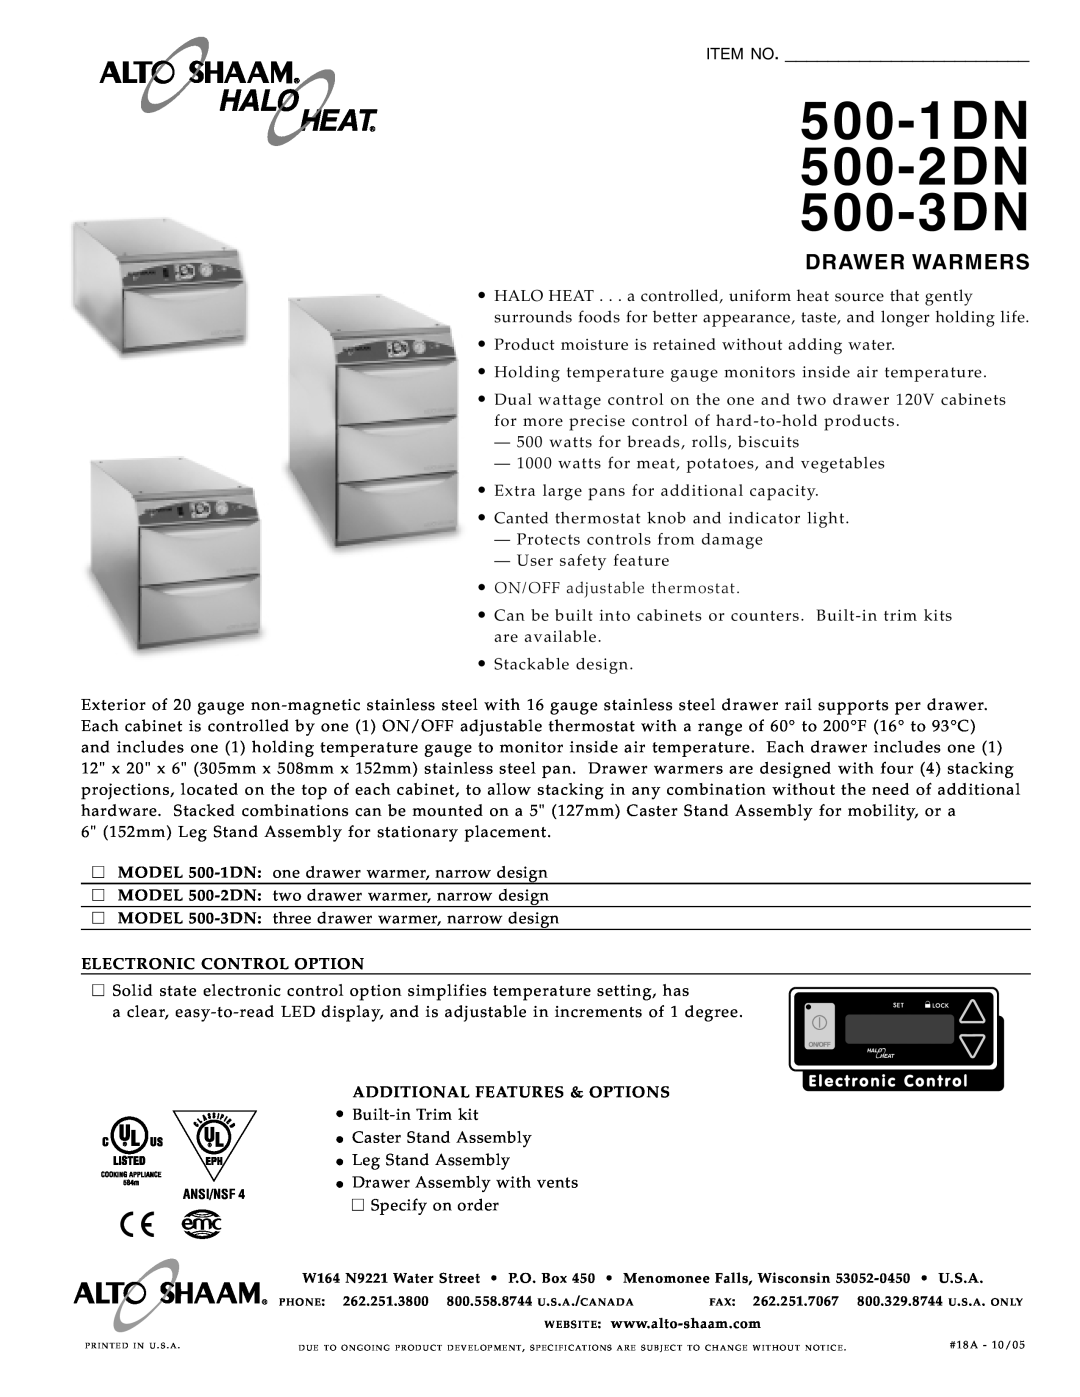 Alto-Shaam specifications 500-1DN 500-2DN 500-3DN, Drawer Warmers, Electronic Control Option, Built-inTrim kit, Item No 